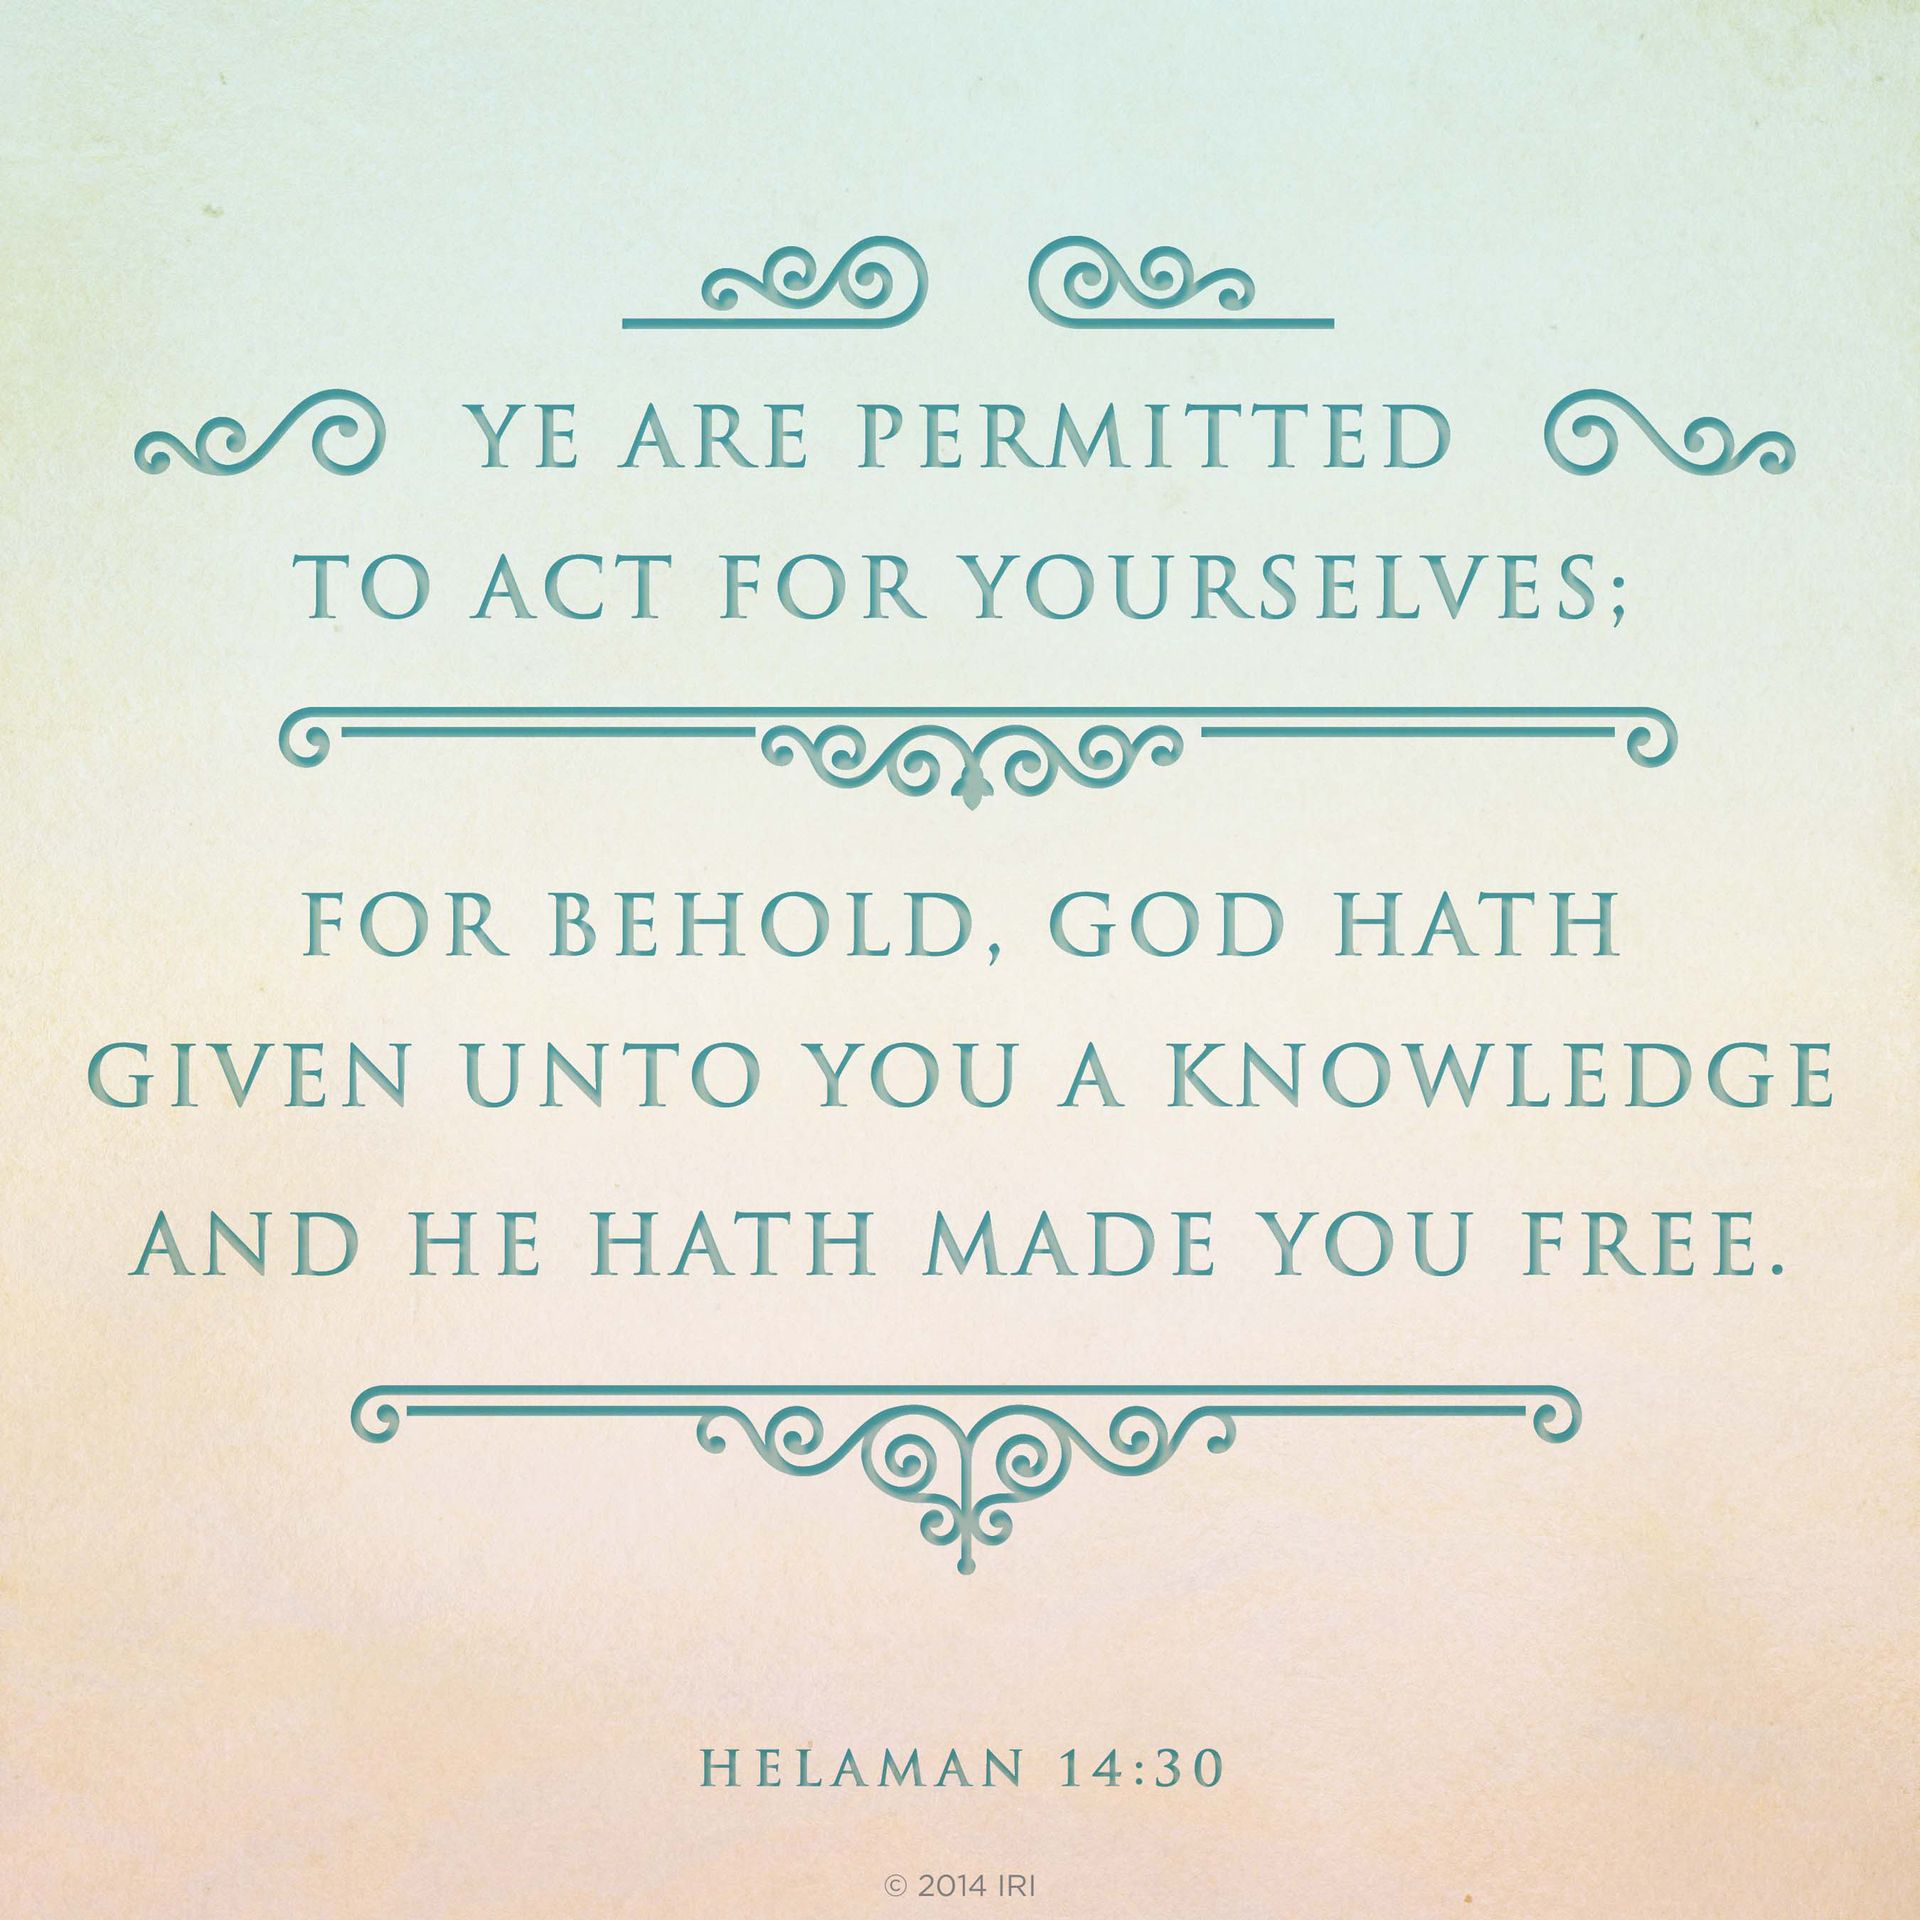 “Ye are permitted to act for yourselves; for behold, God hath given unto you a knowledge and he hath made you free.”—Helaman 14:30